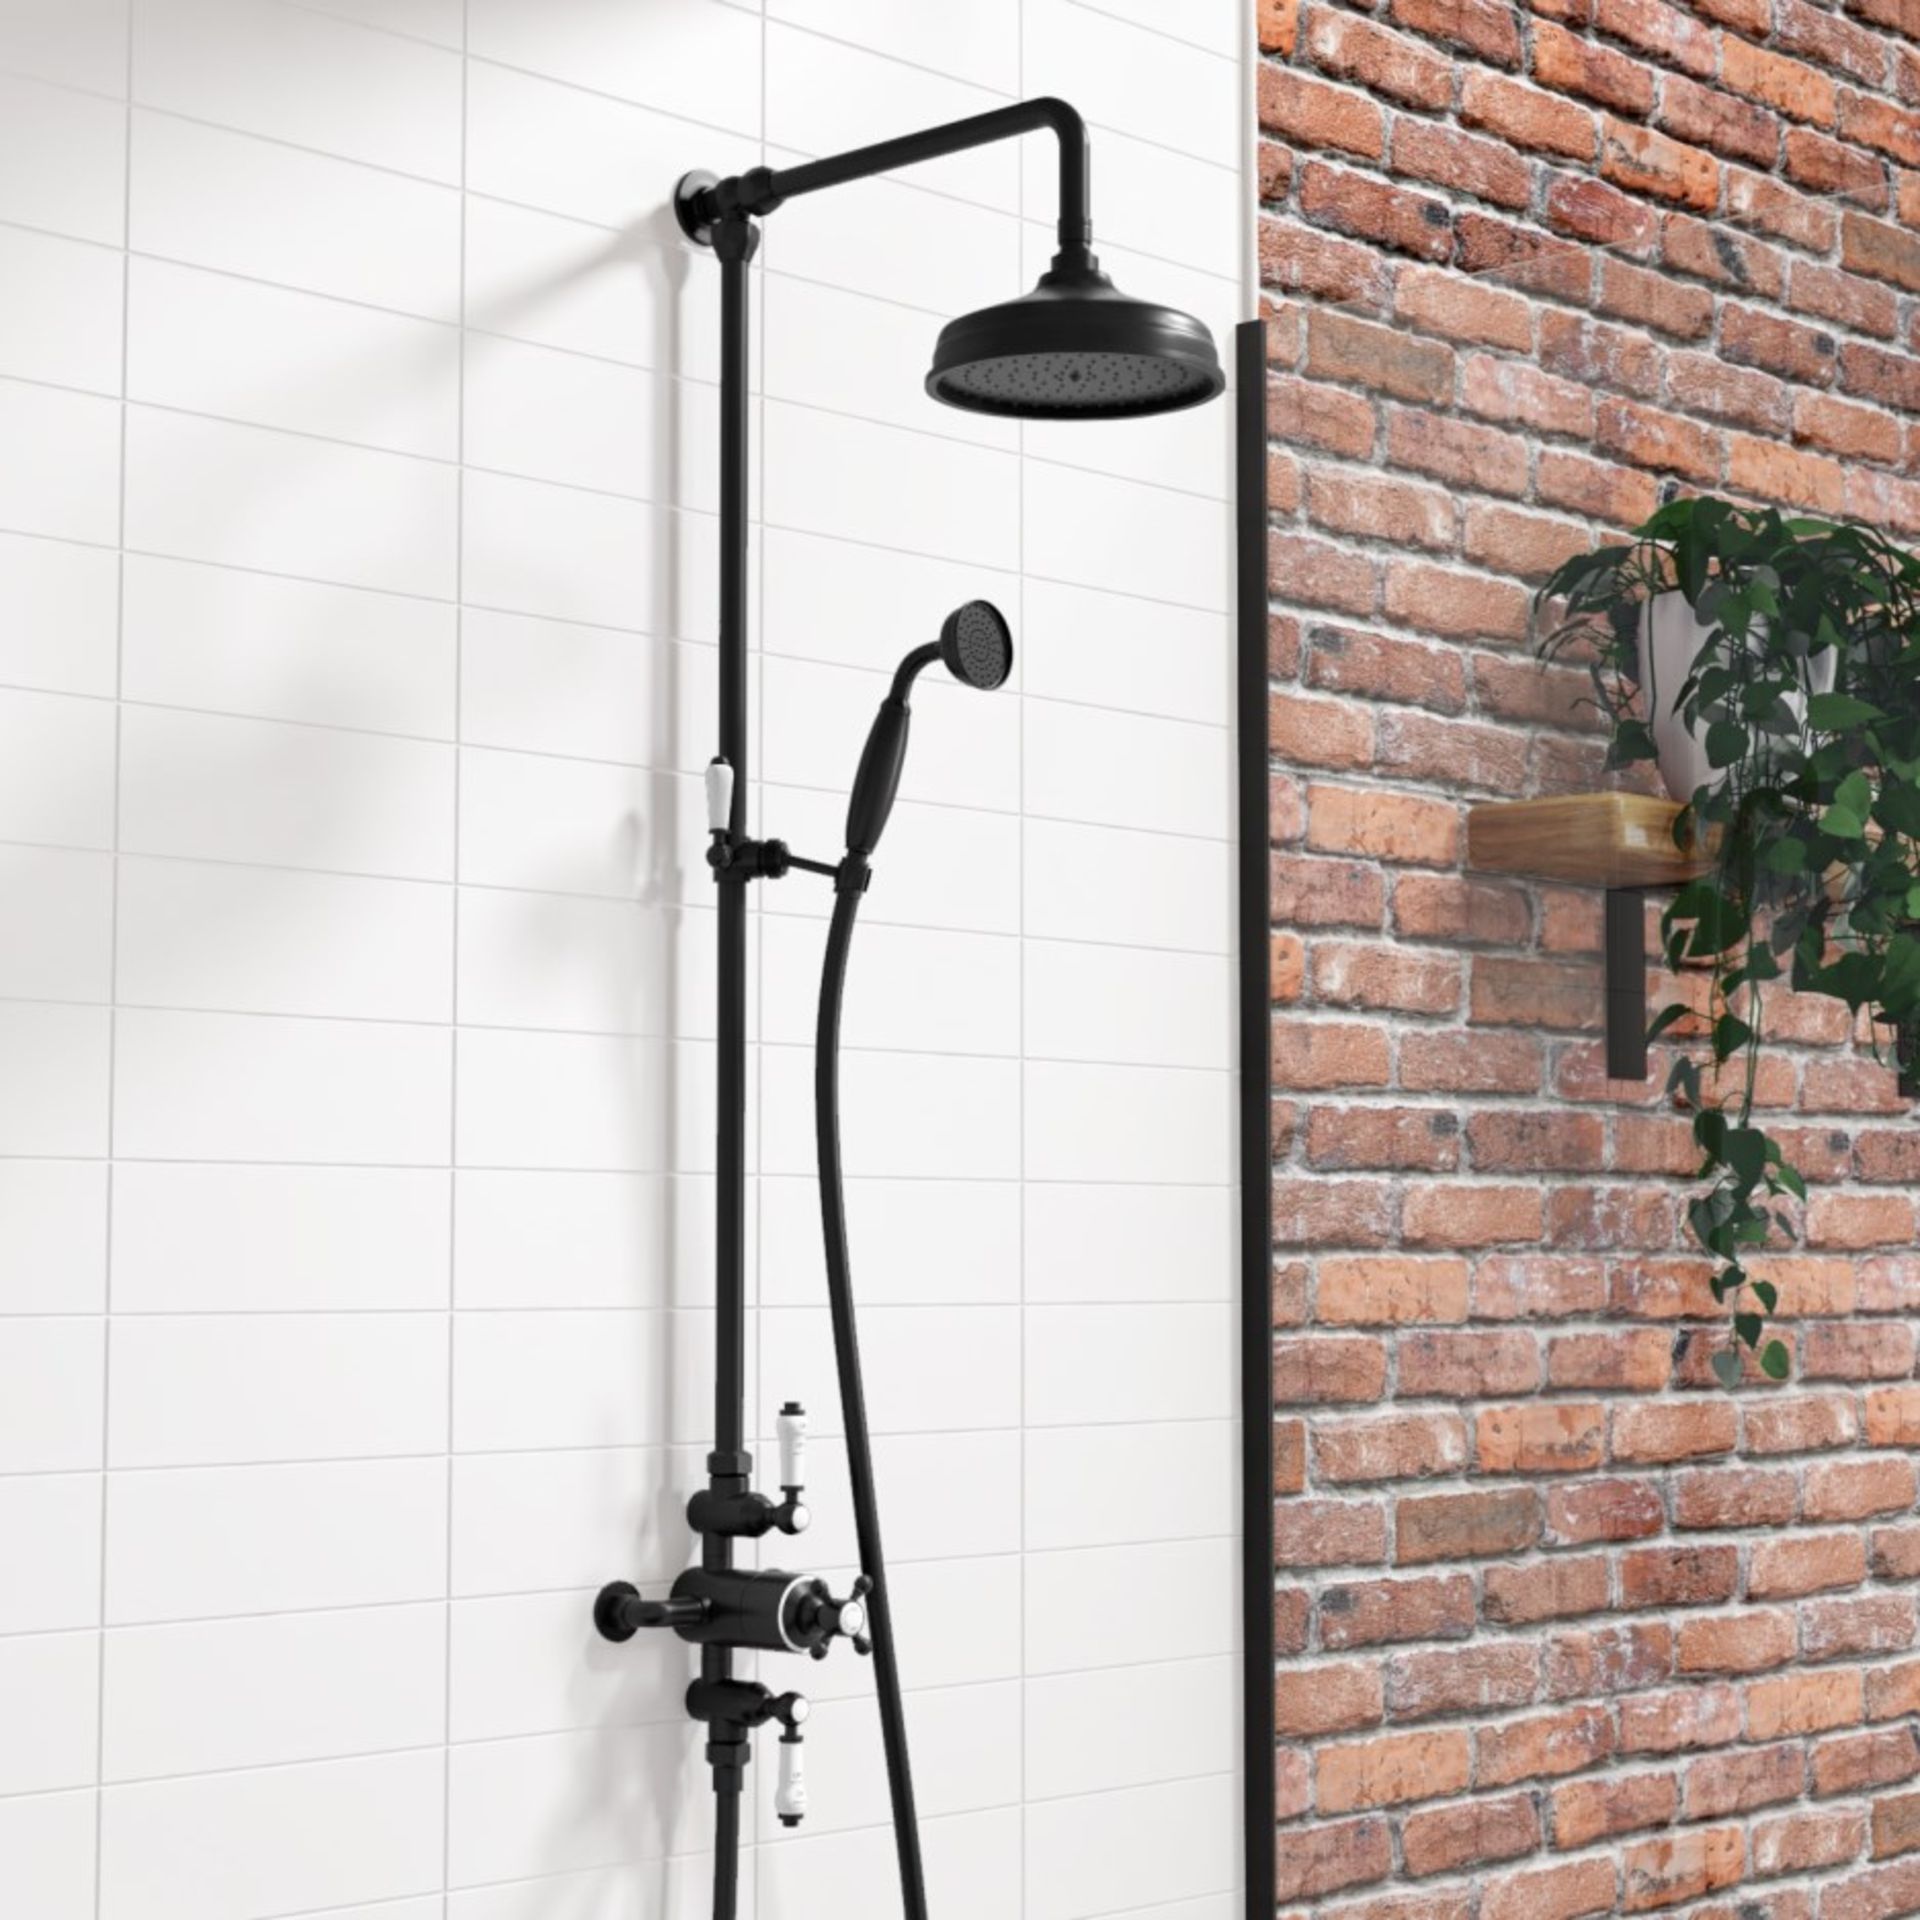 New & Boxed Black Traditional Thermostatic Exposed Mixer Shower Set. Sp6815B. 8"" Head + Handse...